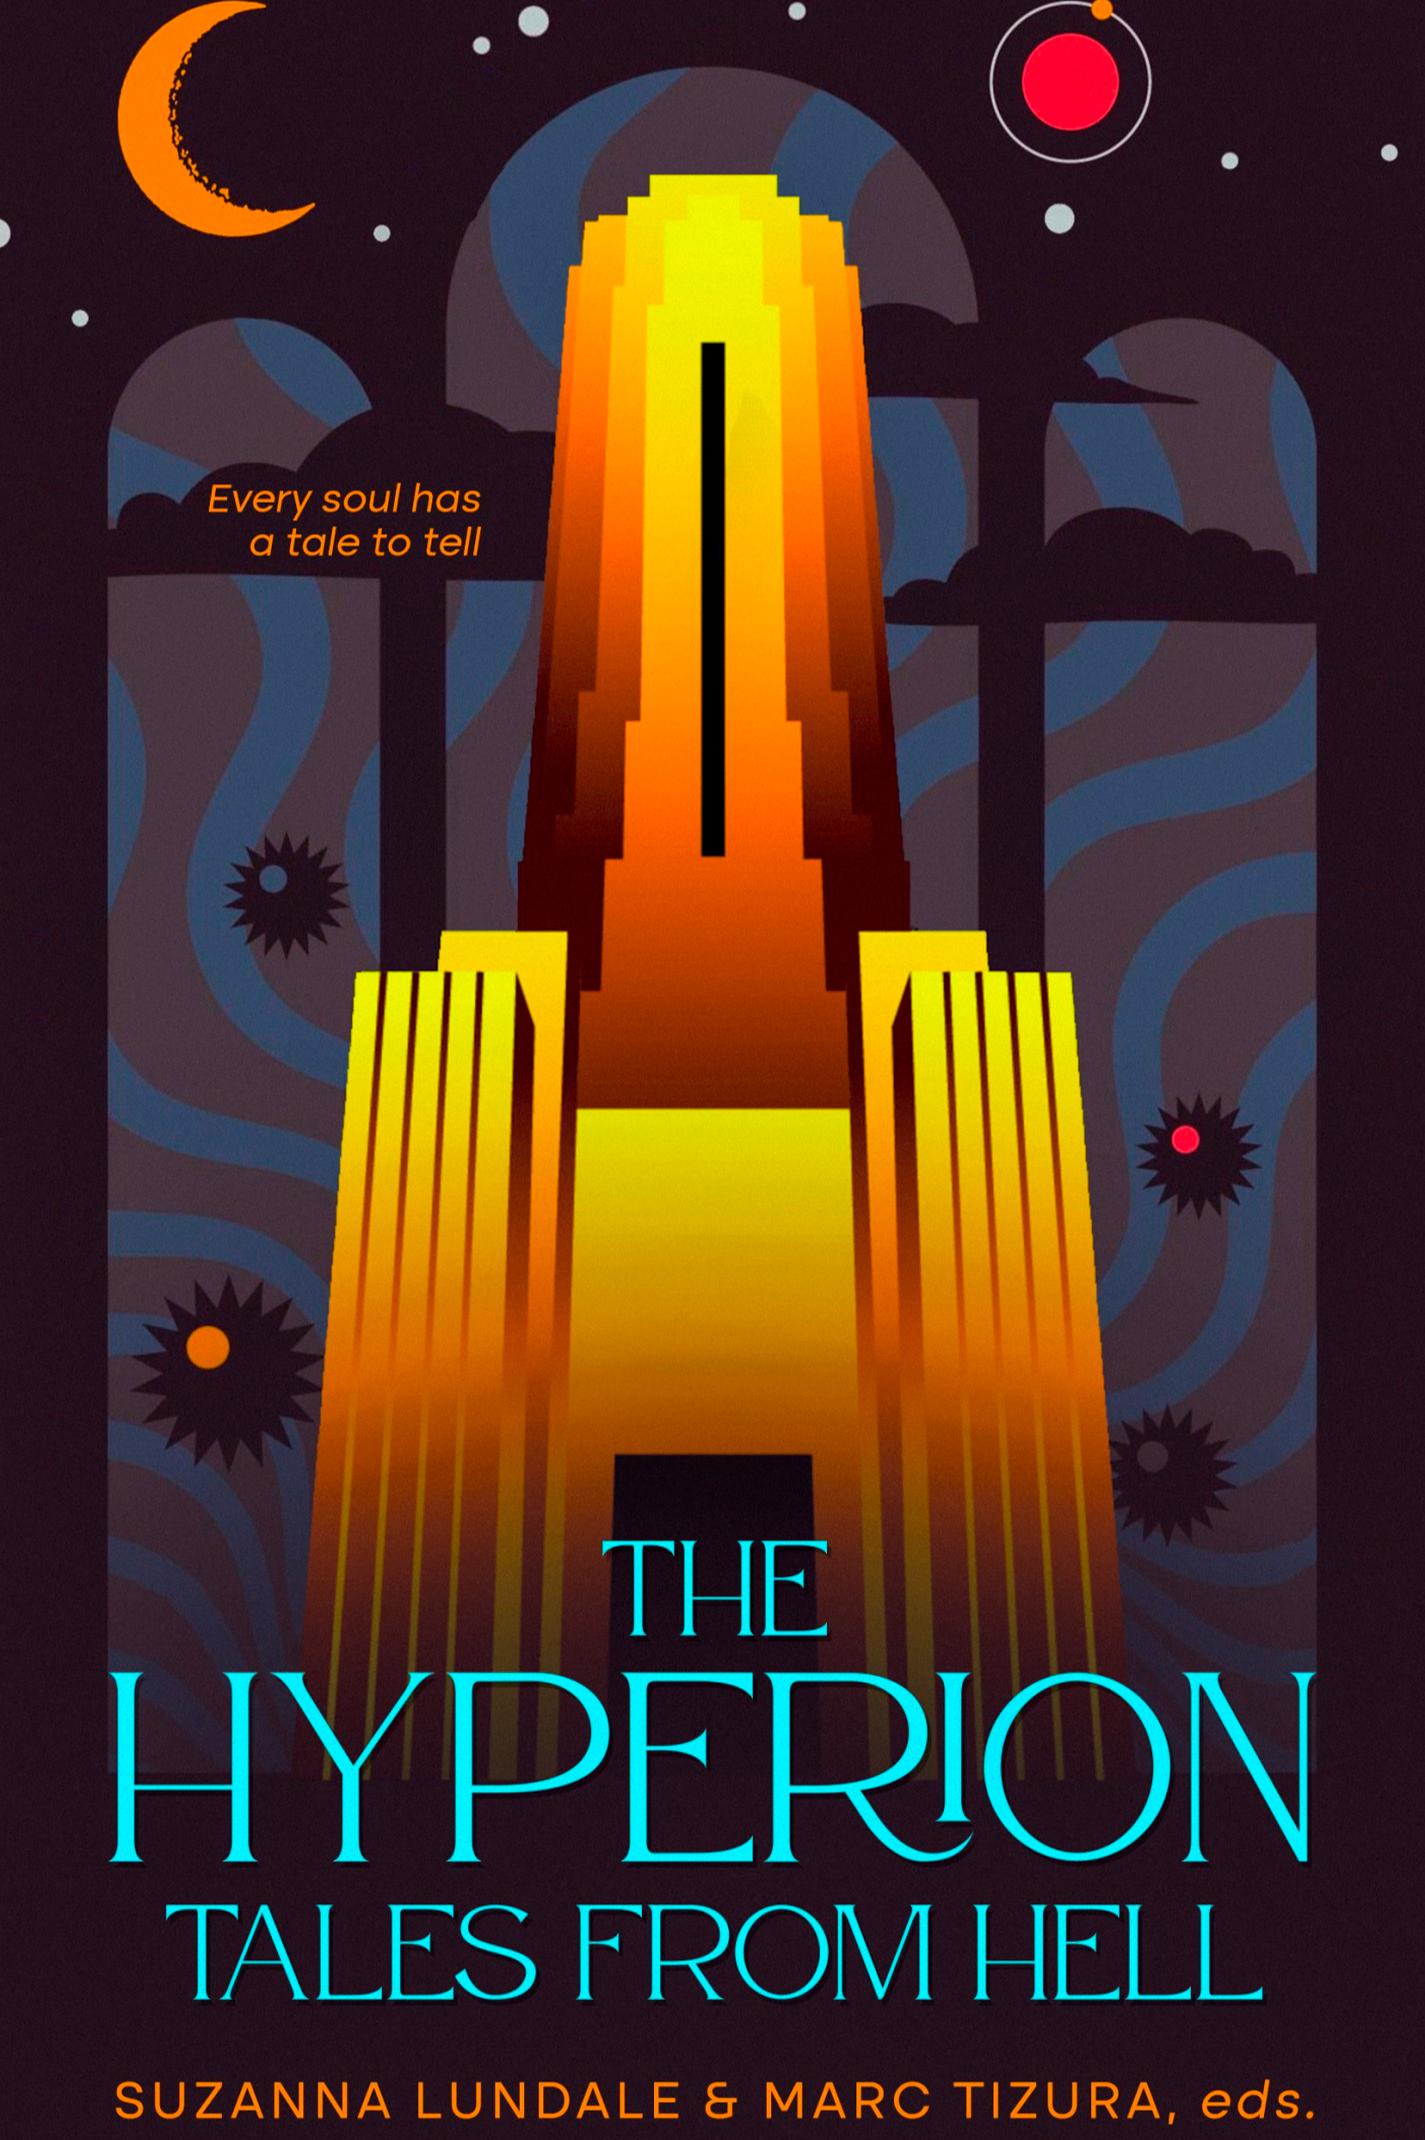 Book cover of The Hyperion: Tales from Hell by End of the World Publishing